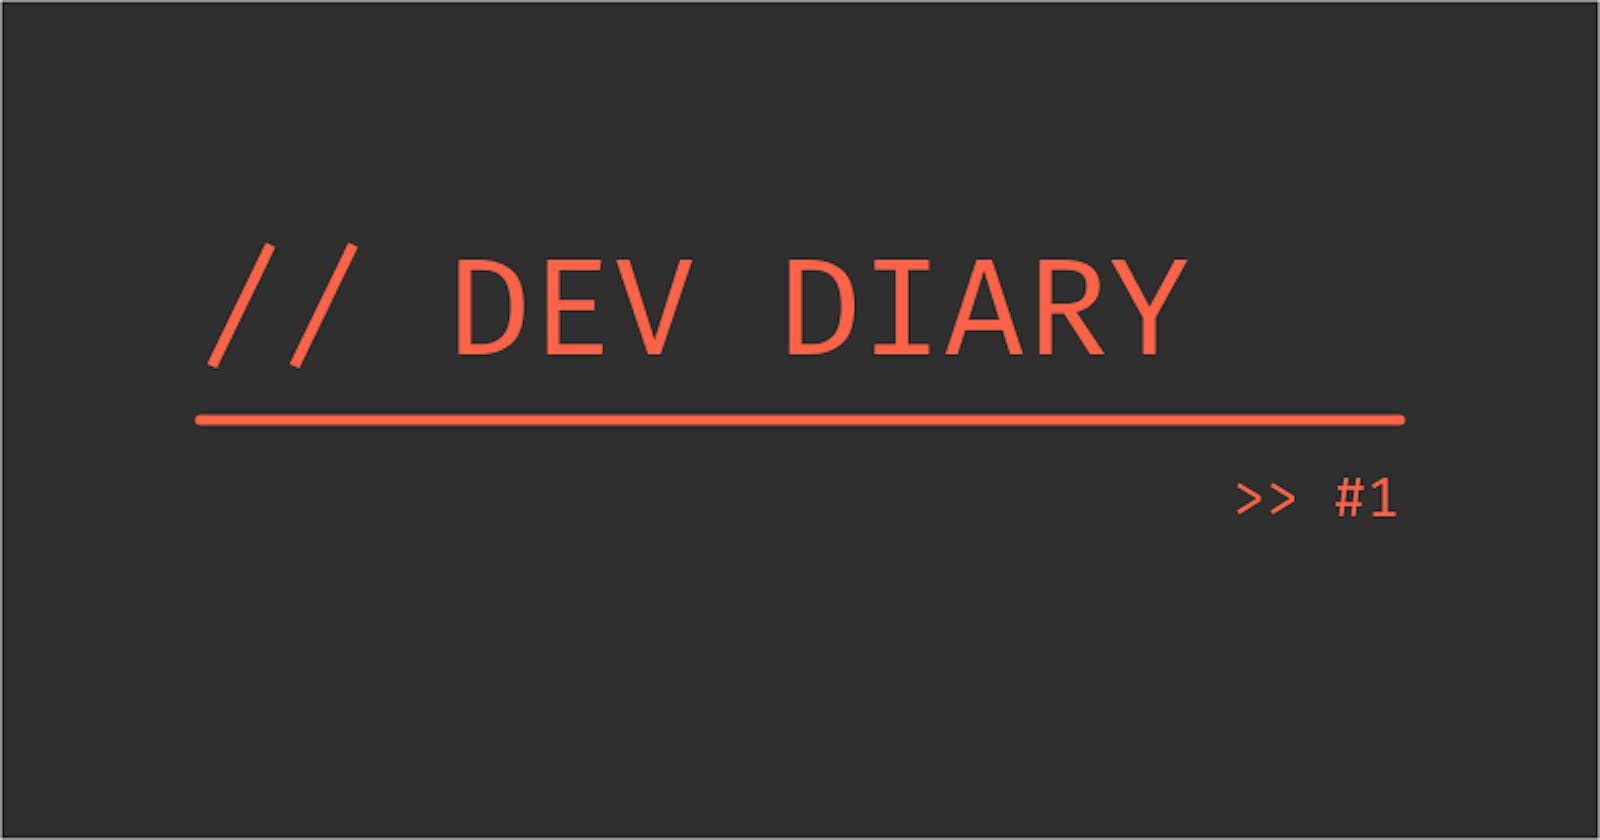 Dev Diary #1: About Me - A Lone Programmer